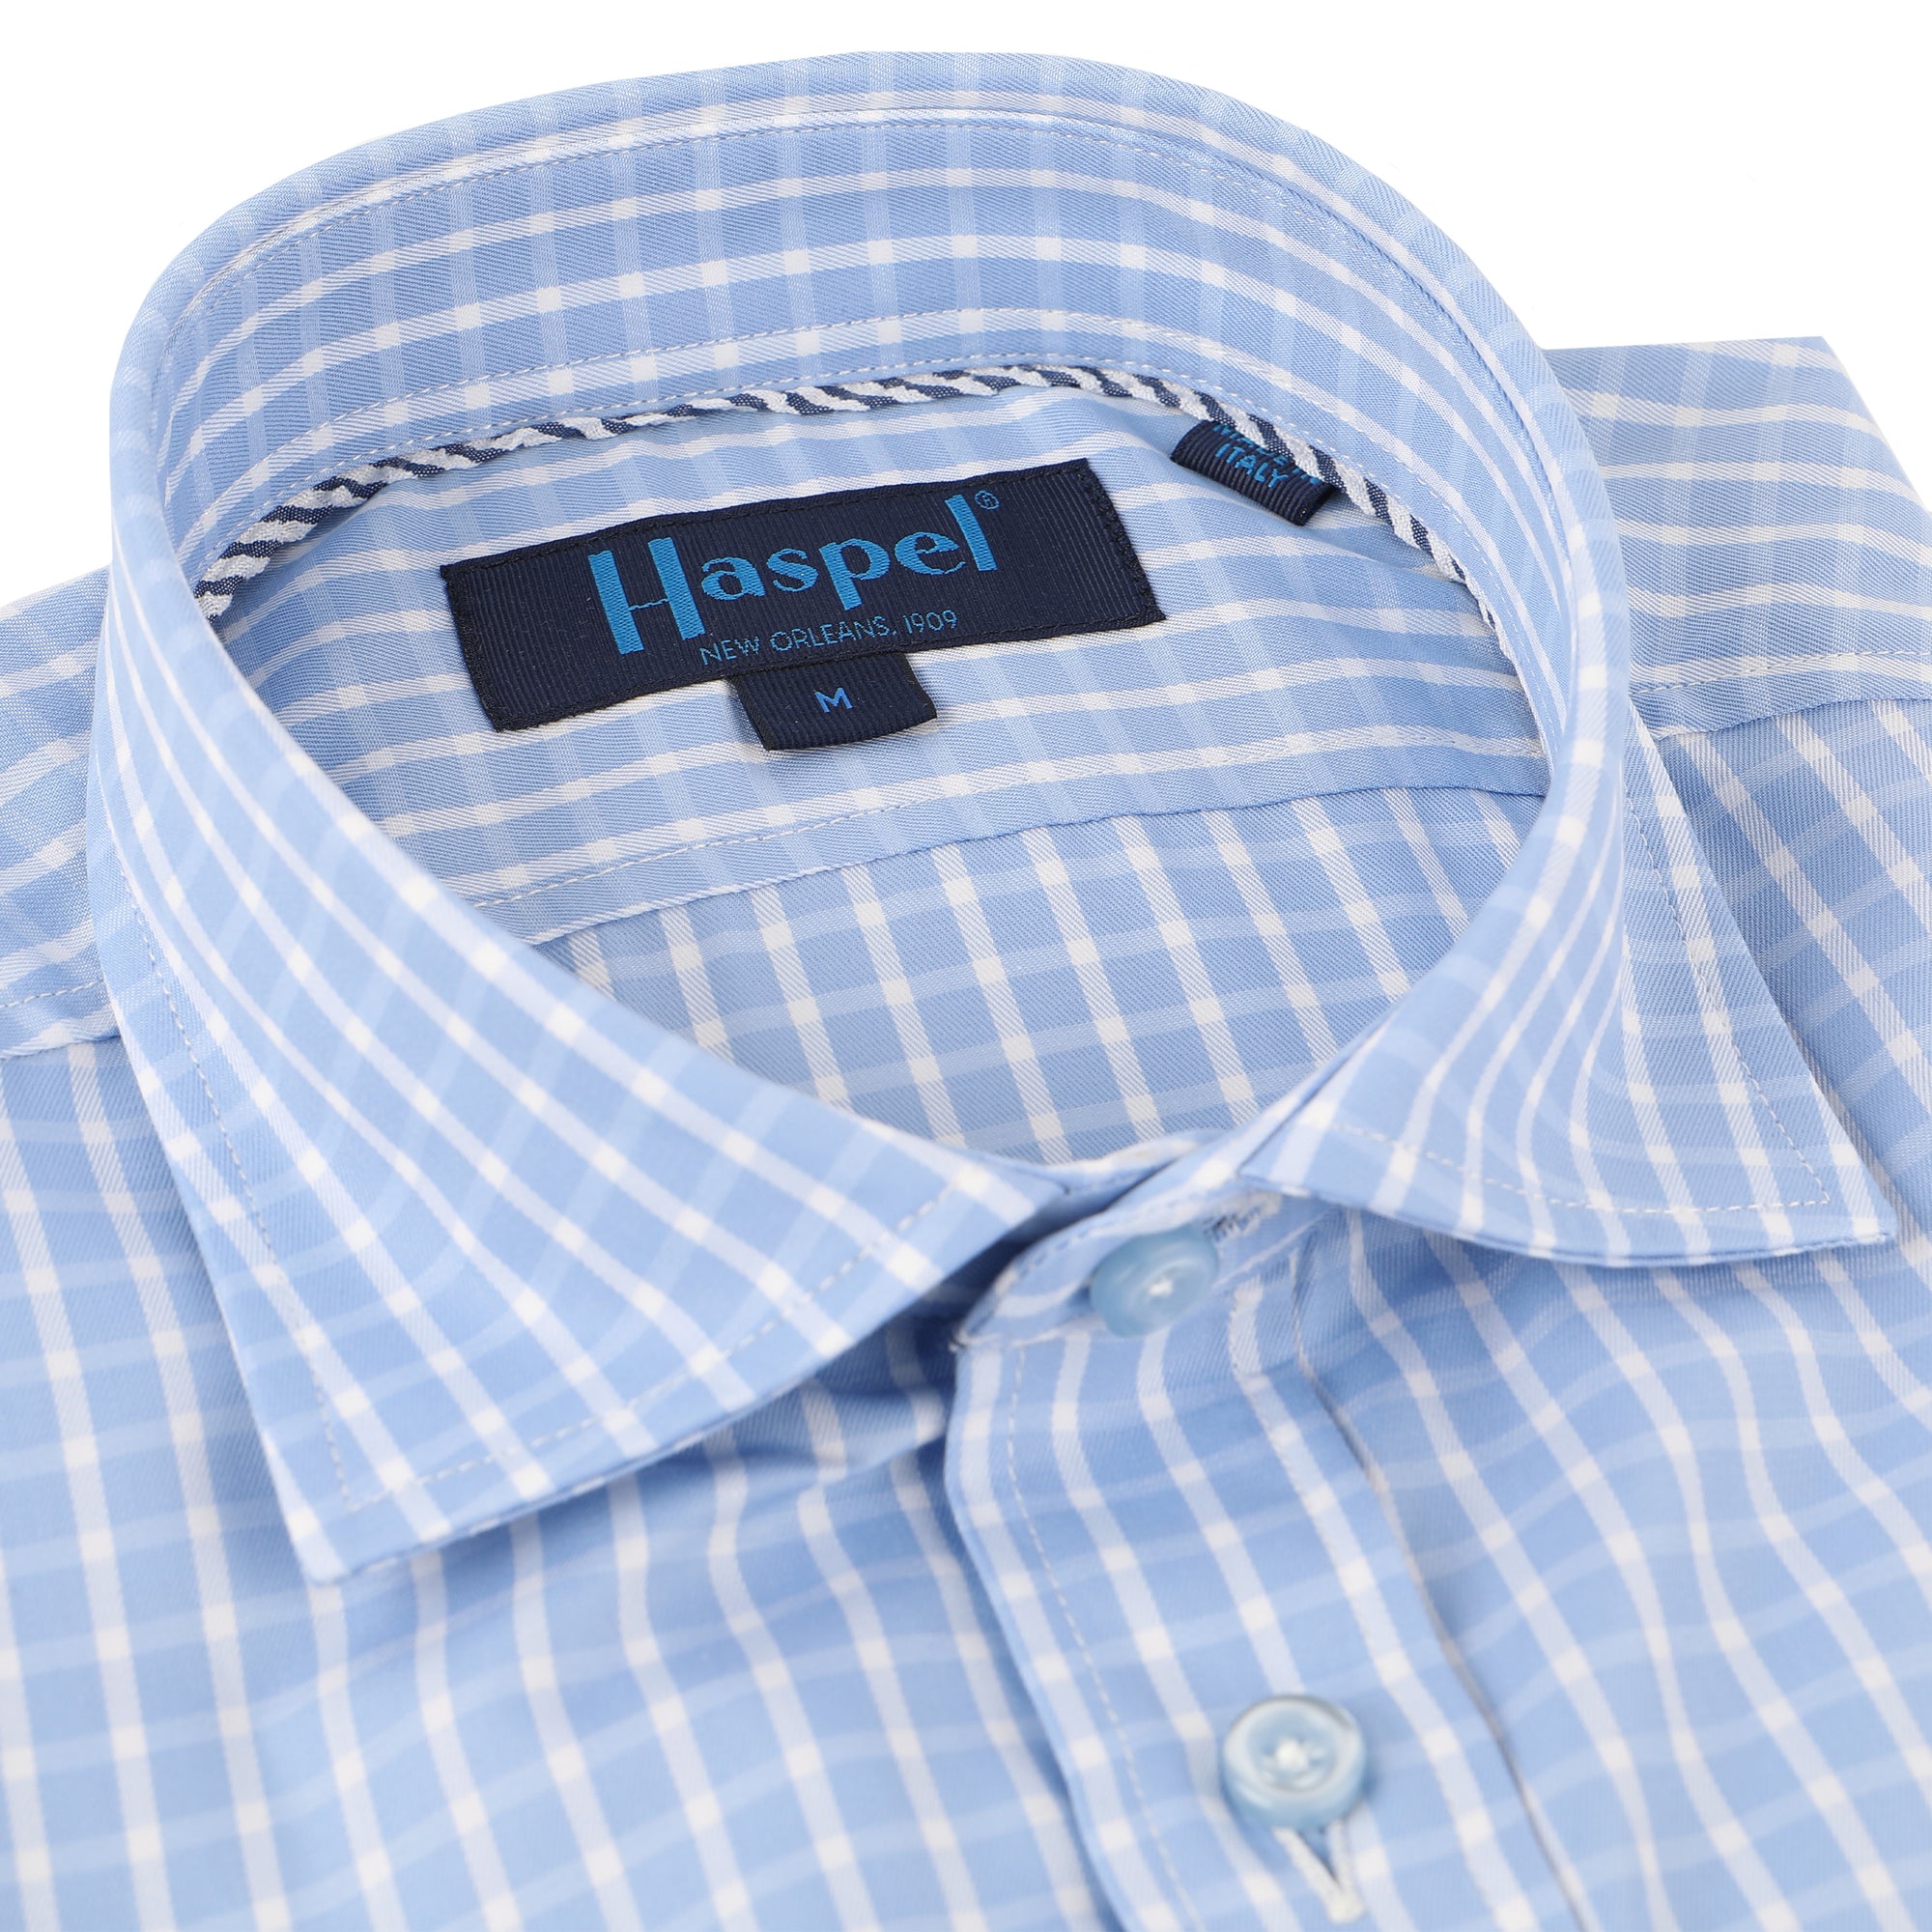 Enjoy the luxury of 100% cotton, Italian made quality, and a subdued light blue and white graph check.  100% Cotton • Spread Collar • Long Sleeve • Chest Pocket • Machine Washable • Made in Italy